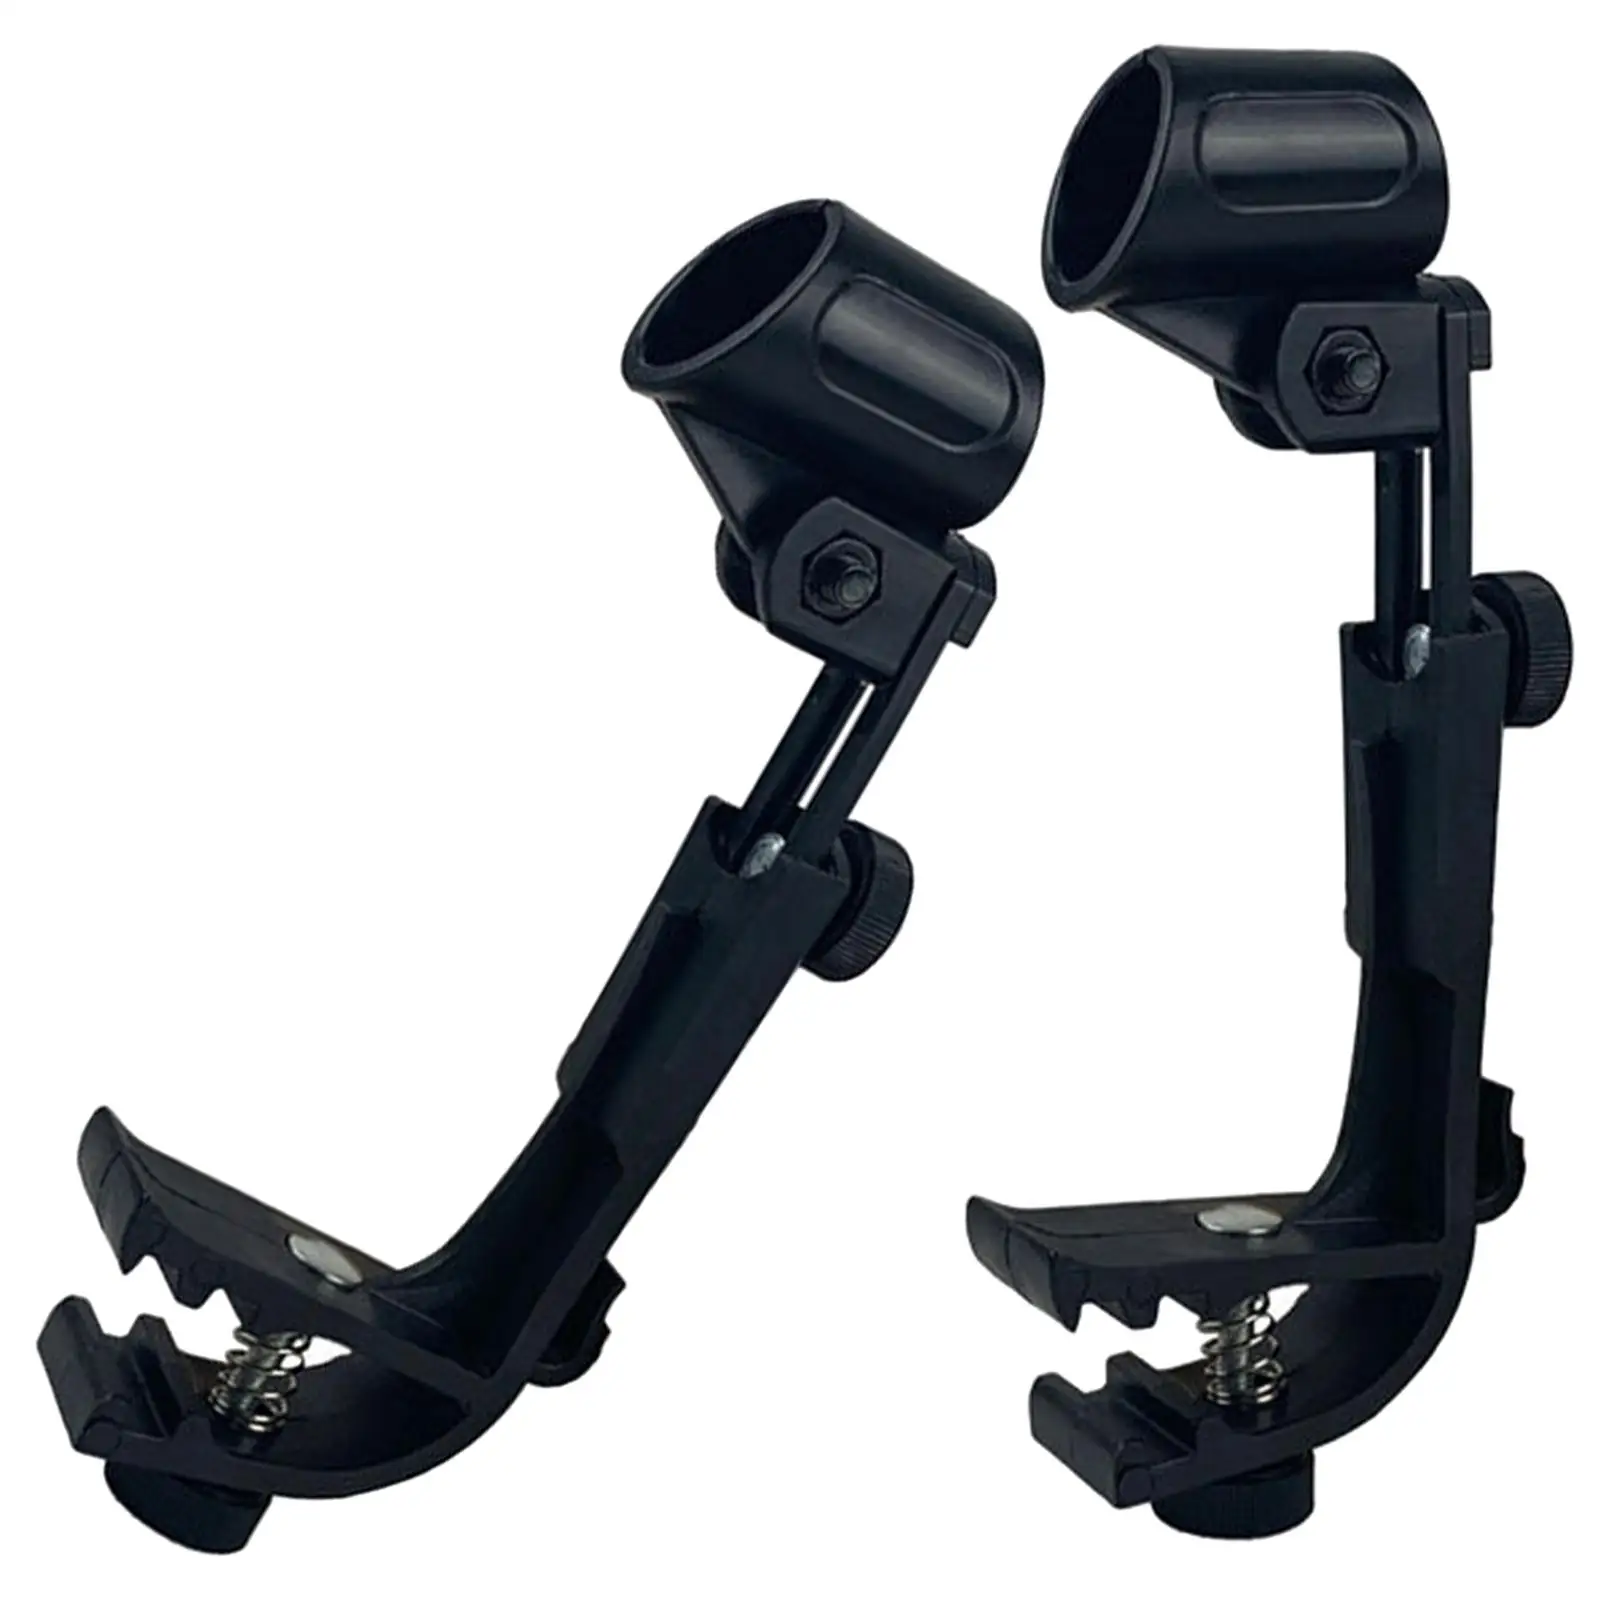 2 Pieces Drum Microphone Clamp Holder Accessories Drum Rim Clamp Adjustable for Meeting Lecture Mount Microphone Recording Stage